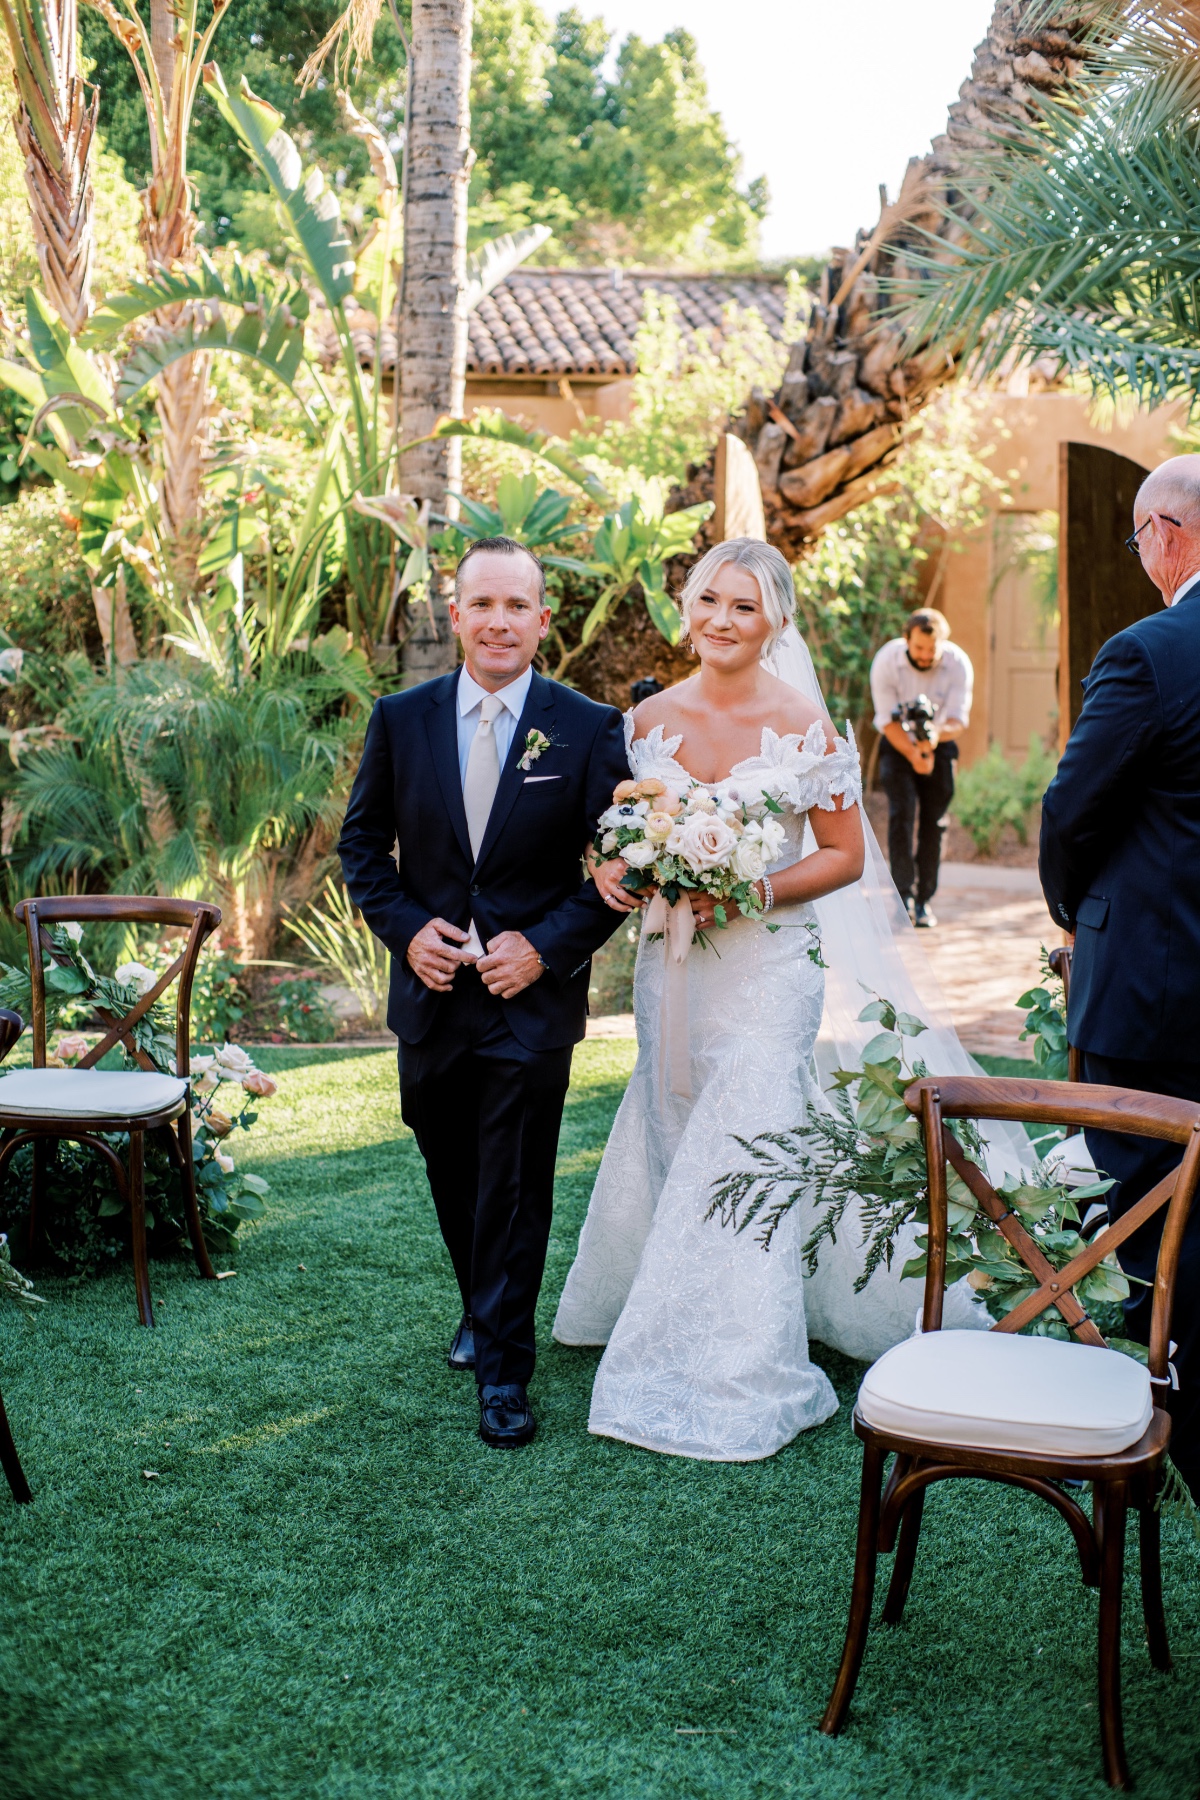 A Microwedding in Phoenix with a 30k Budget